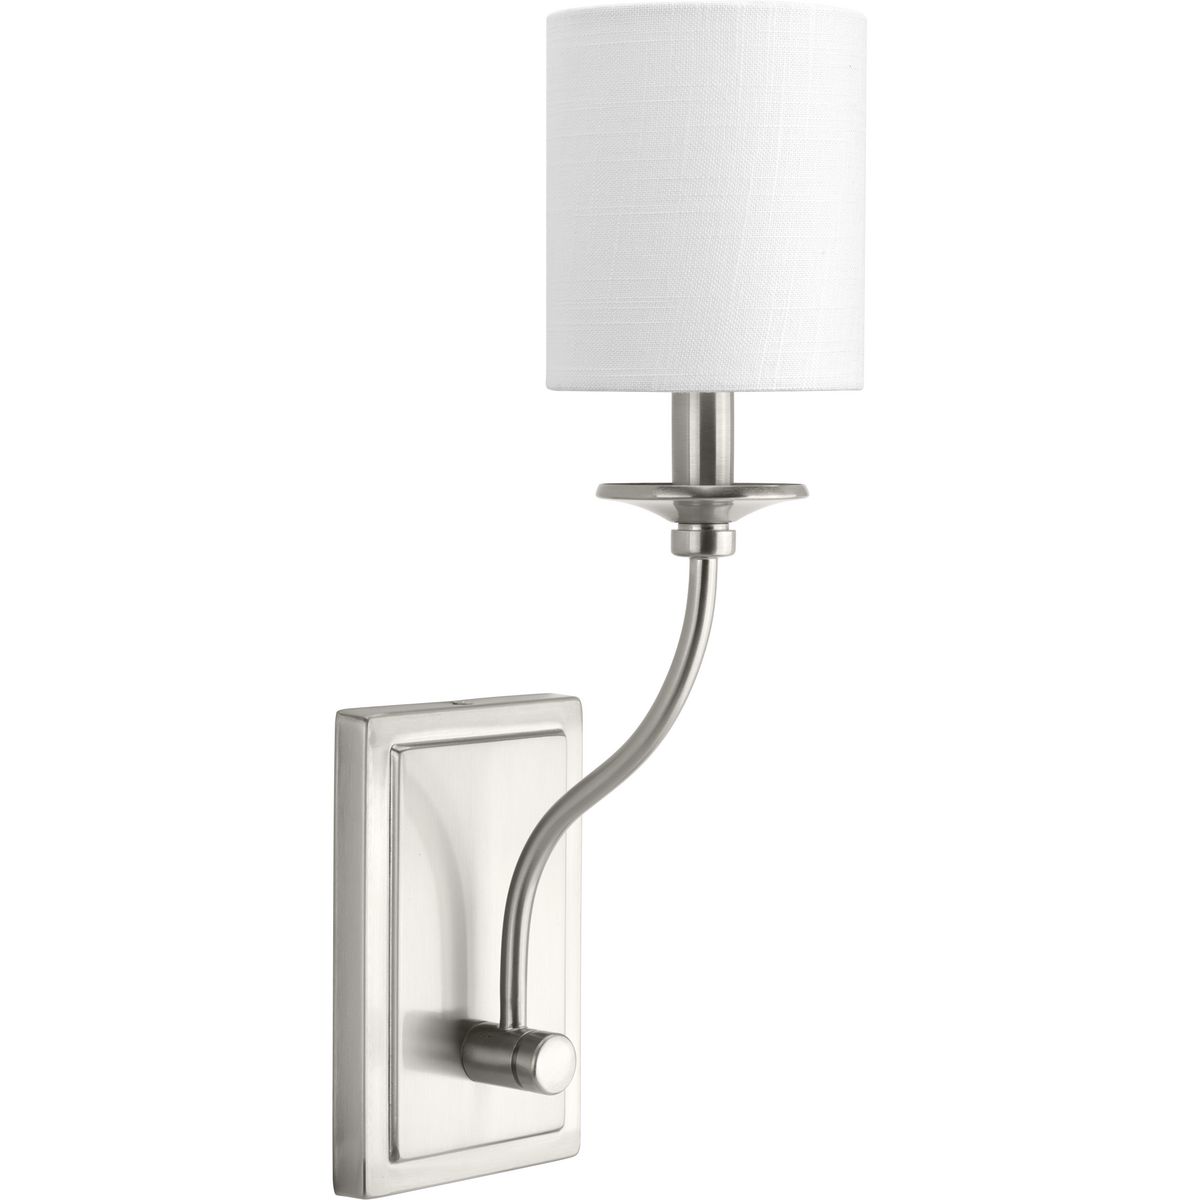 P710018-009 1-60W CAND WALL SCONCE